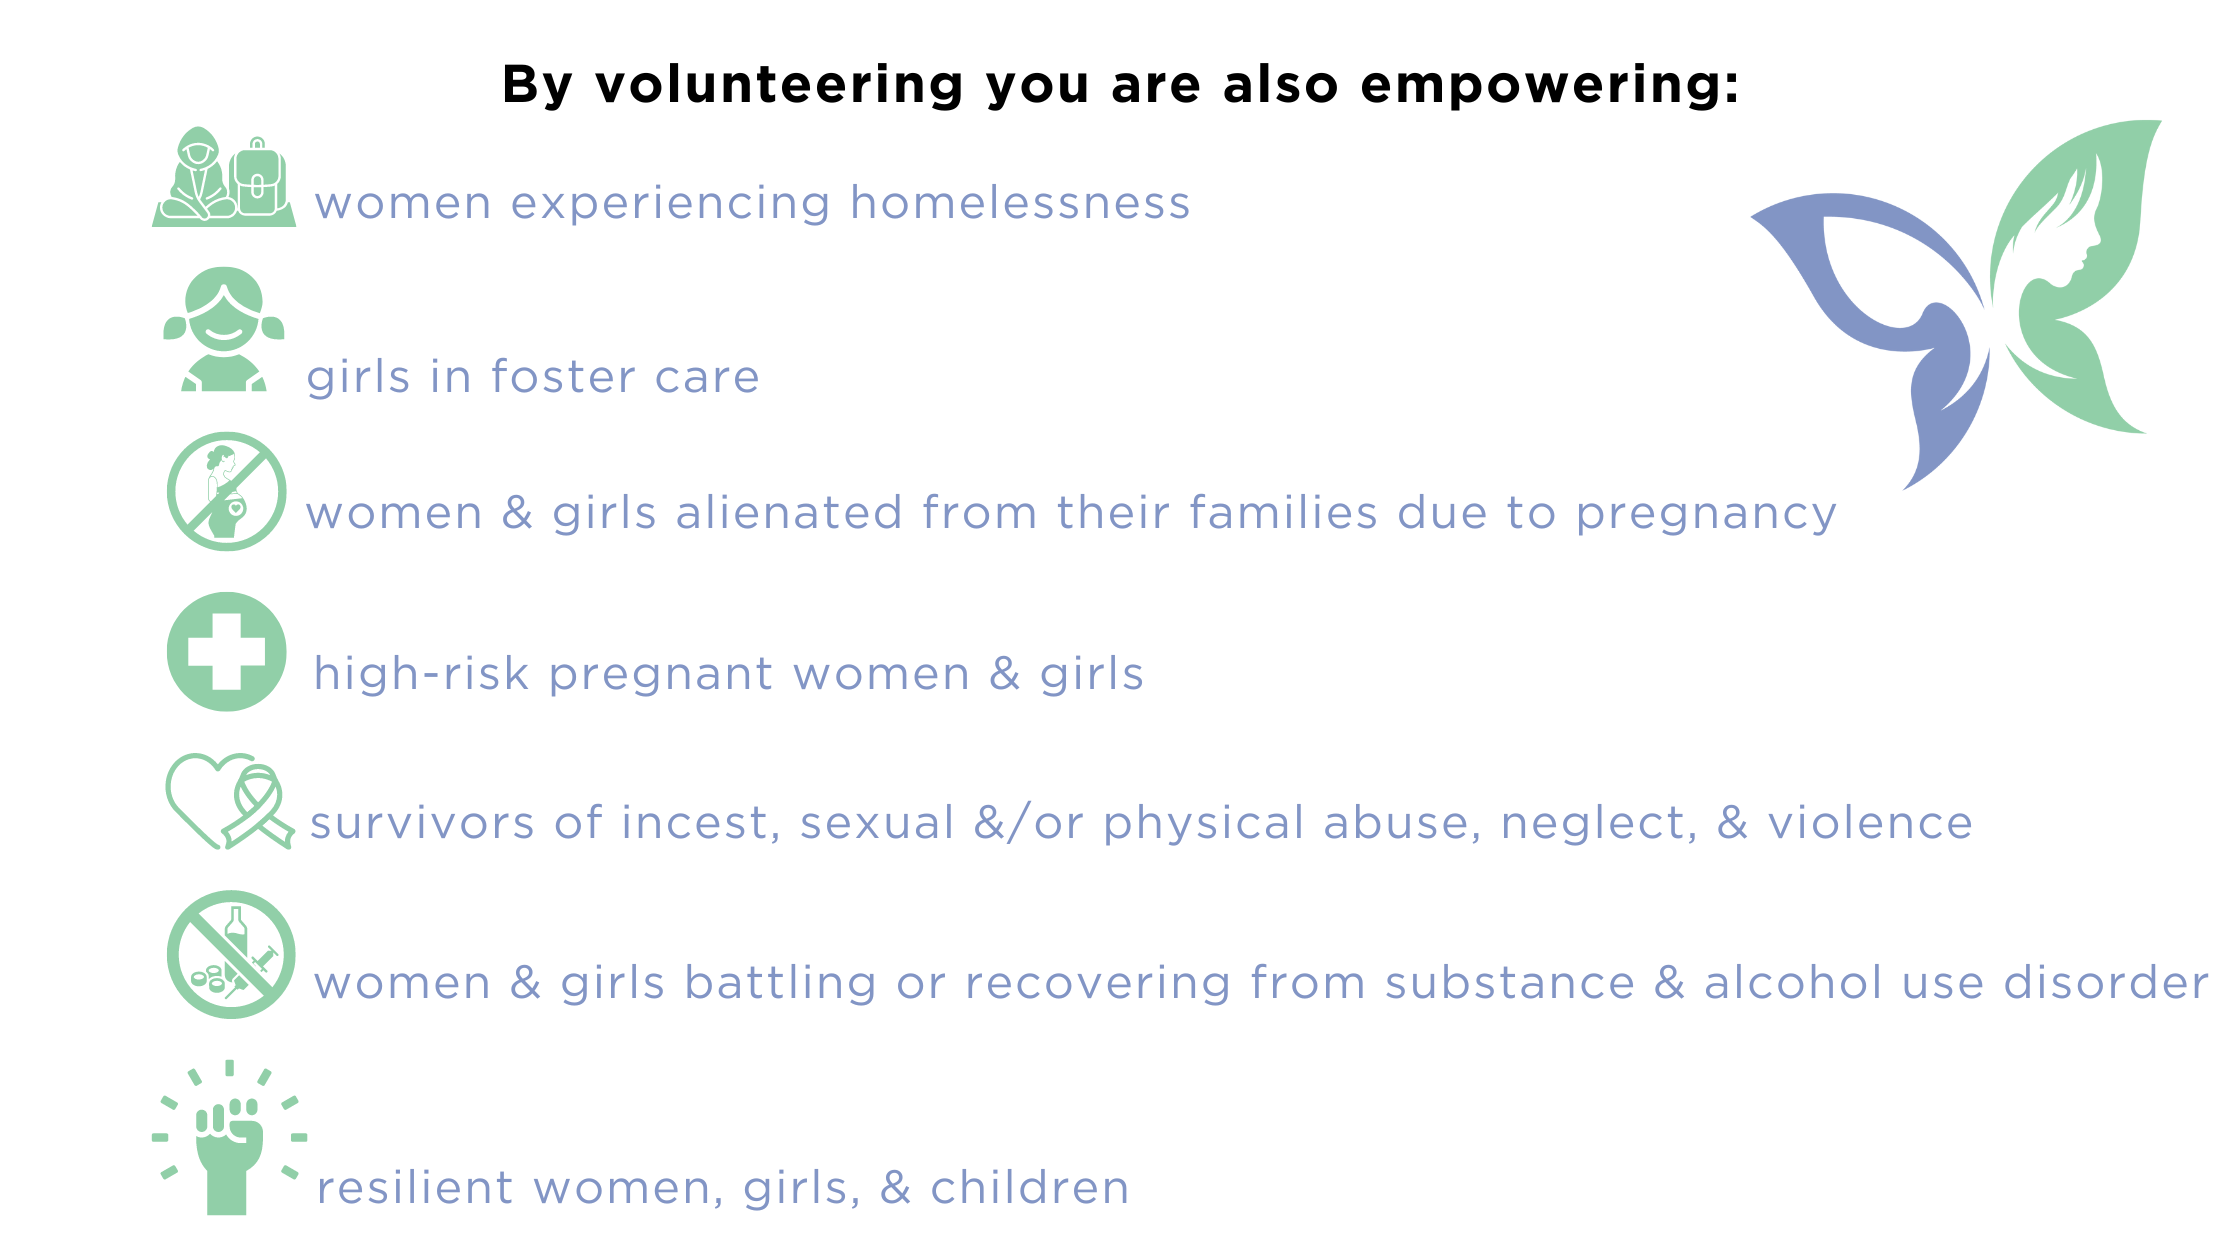 women experiencing homelessness, girls in foster care, high-risk pregnant women & girls, survivors of incest, sexual &/or physical abuse, neglect, & violence, women & girls battling or recovering from substance & alcohol use disorder, women & girls battling or recovering from substance & alcohol use disorder